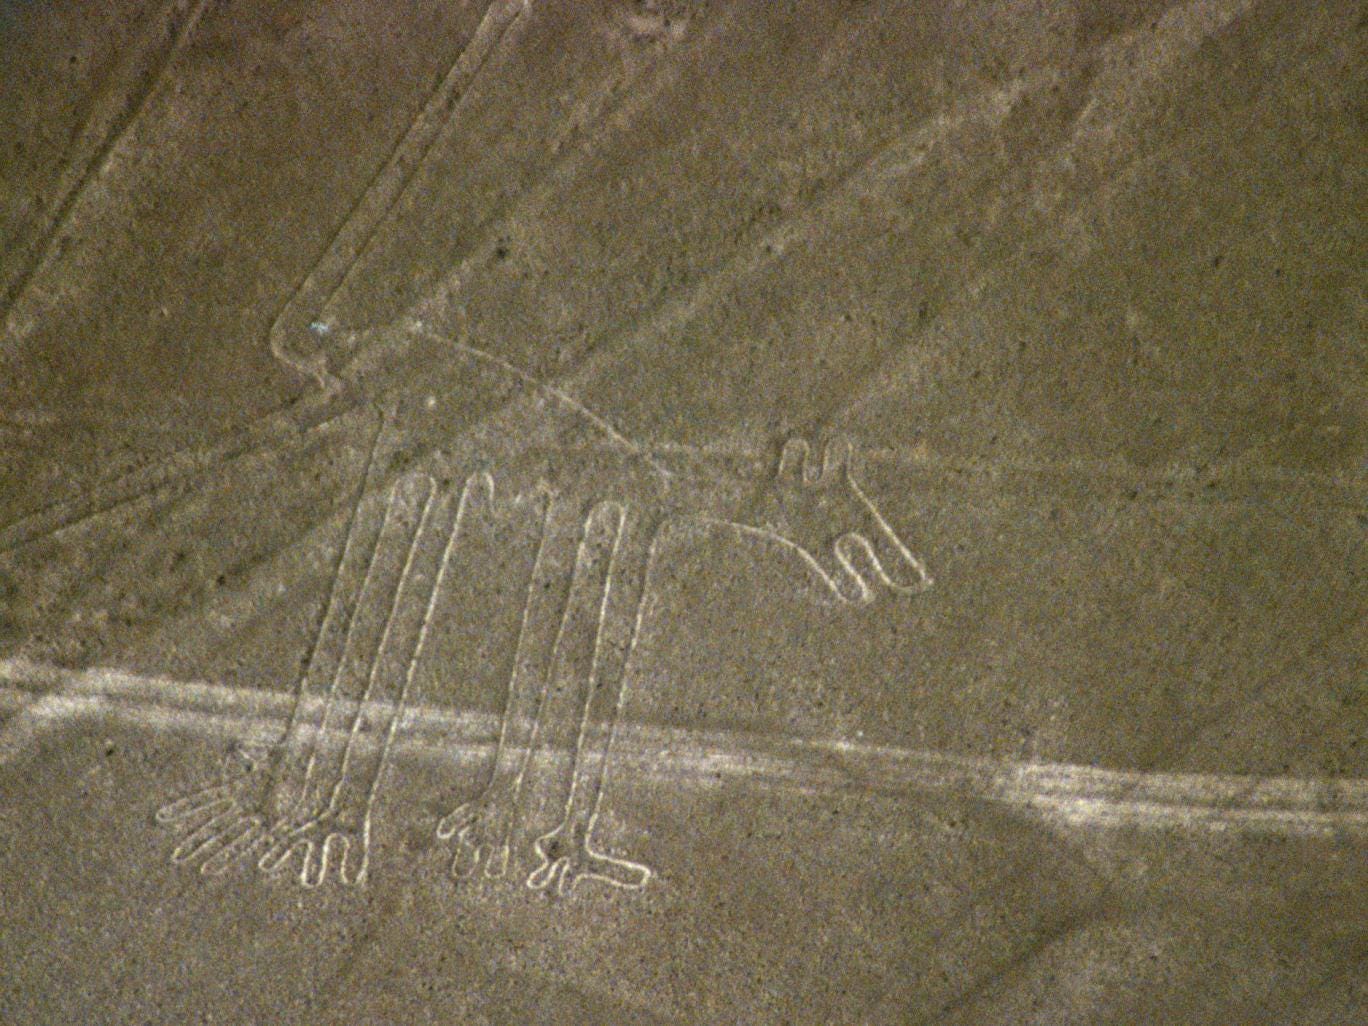 It is one of several animals and birds depicted on the ancient plateau